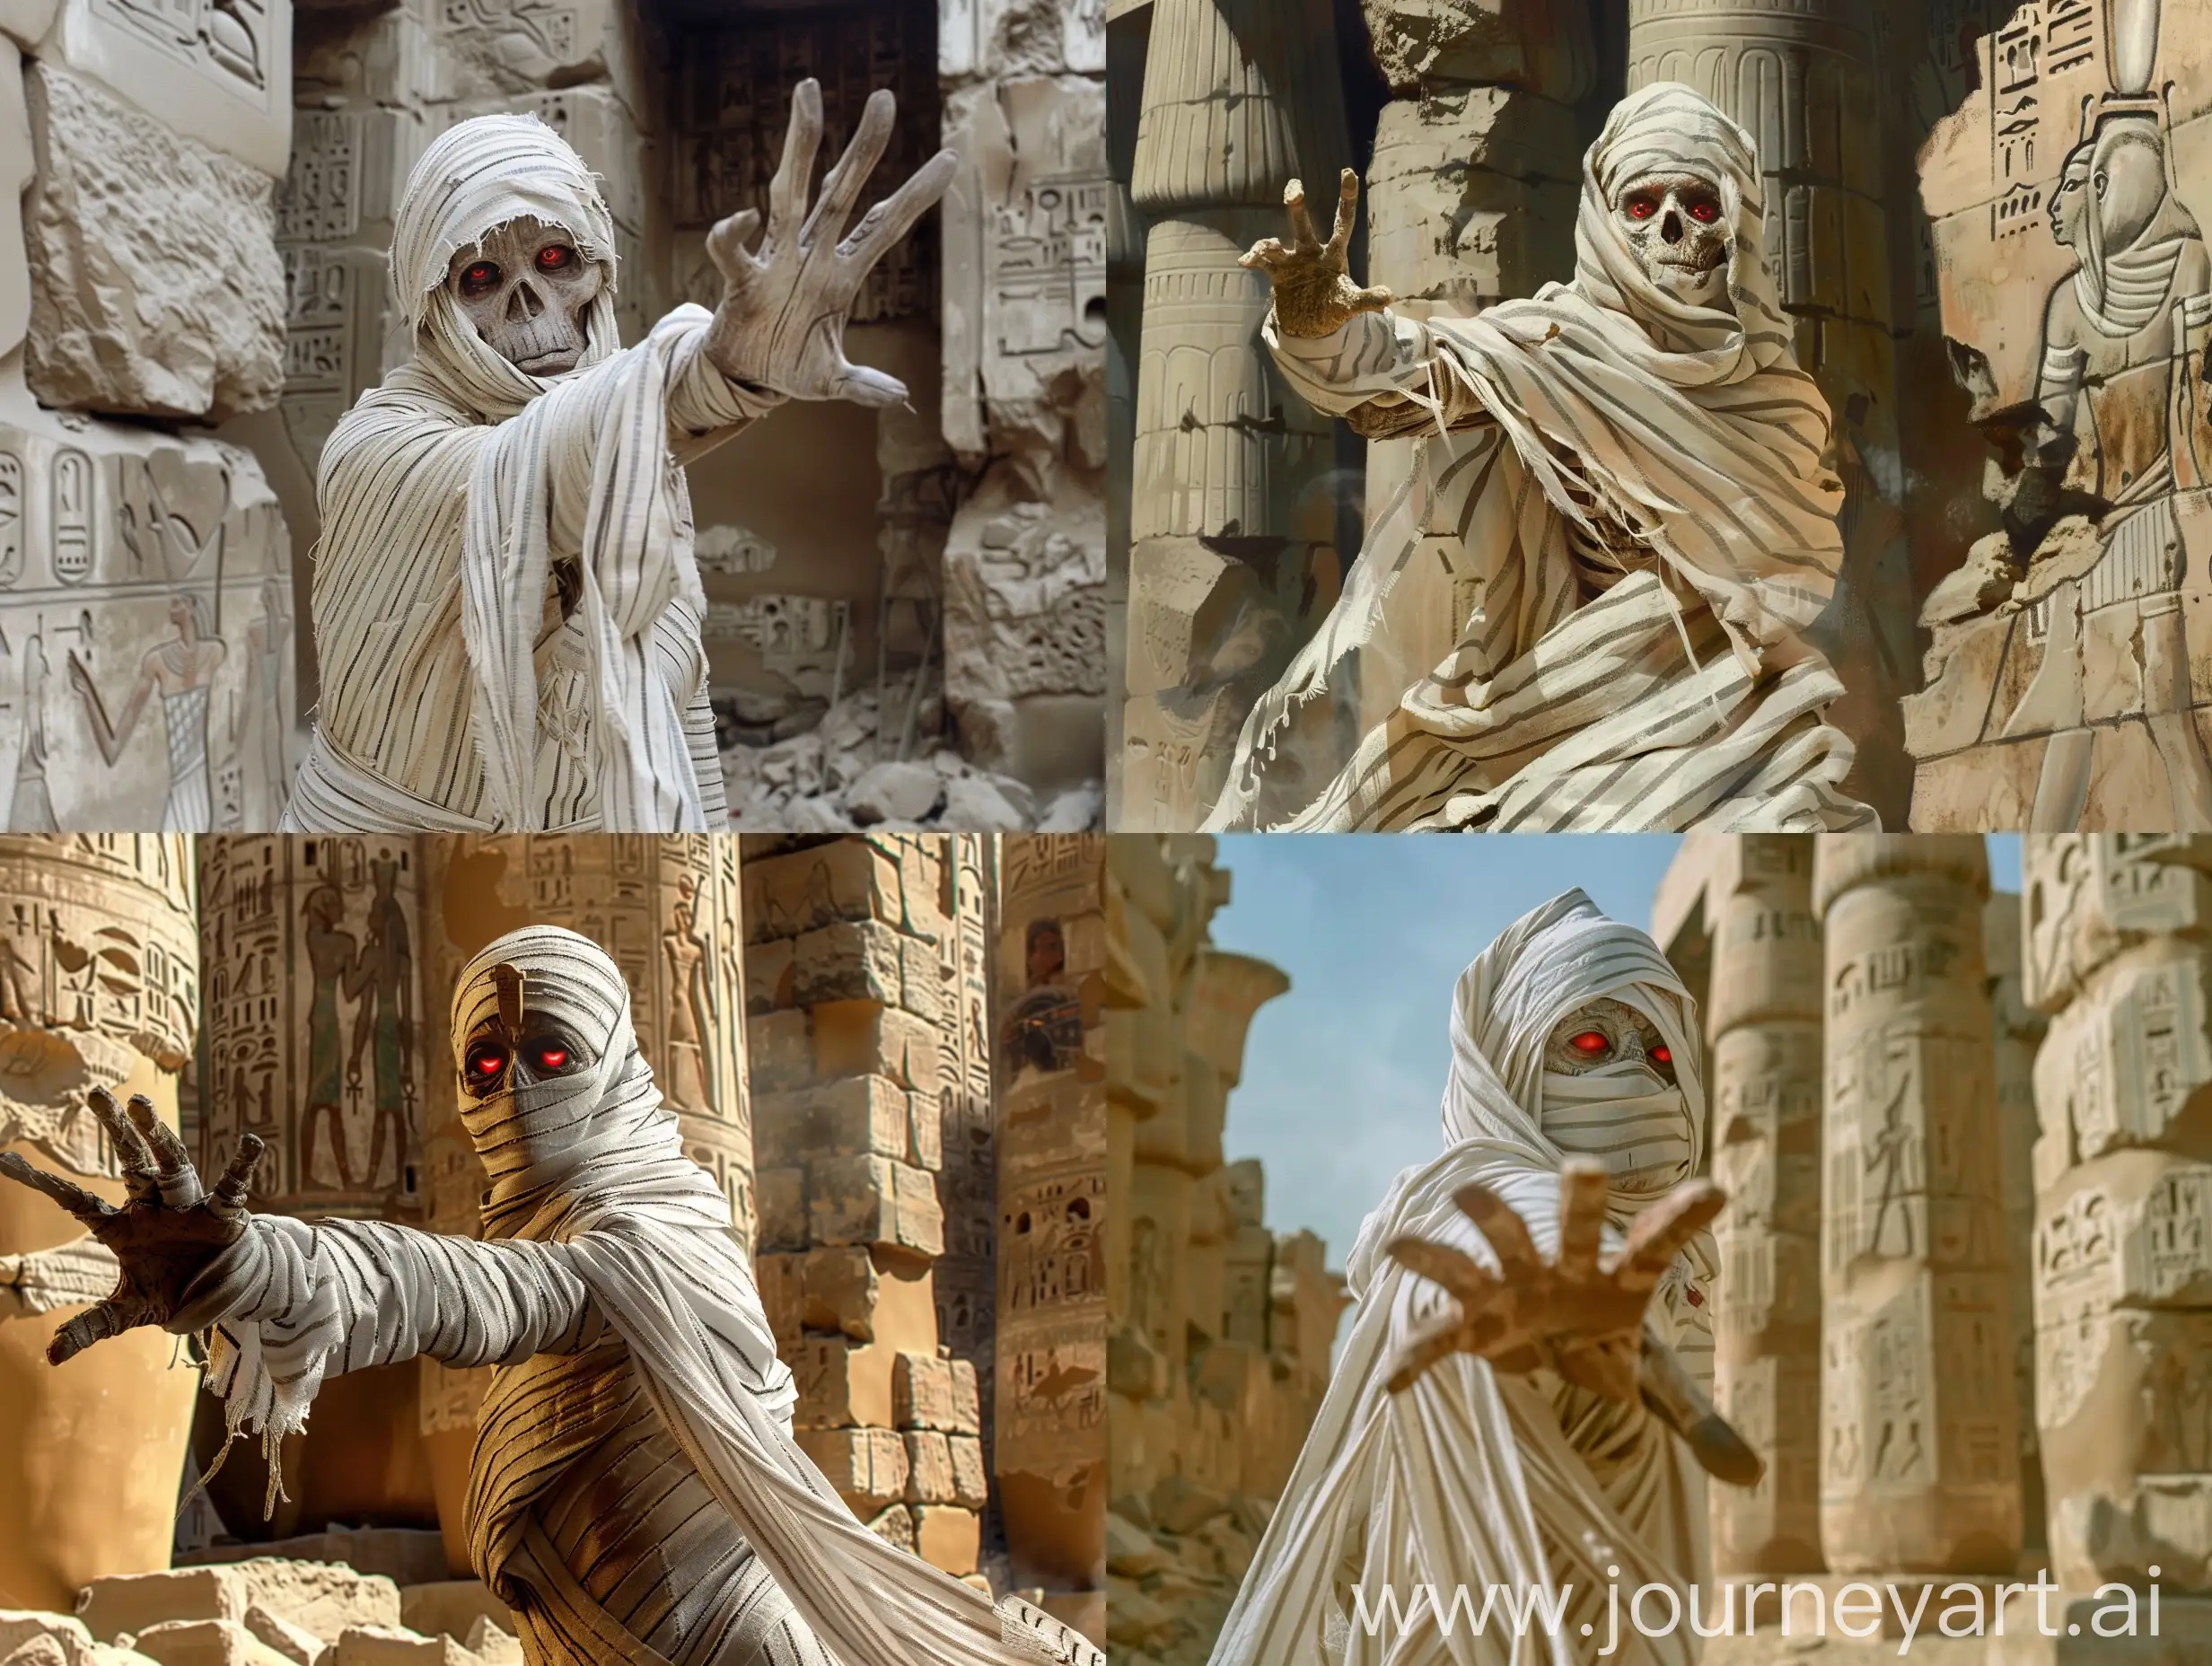 An ancient mummy, wrapped in long white striped cloths, stands awkwardly, stretching out his hand to the camera, with red eyes, surrounded by an ancient Egyptian temple whose walls have been destroyed.